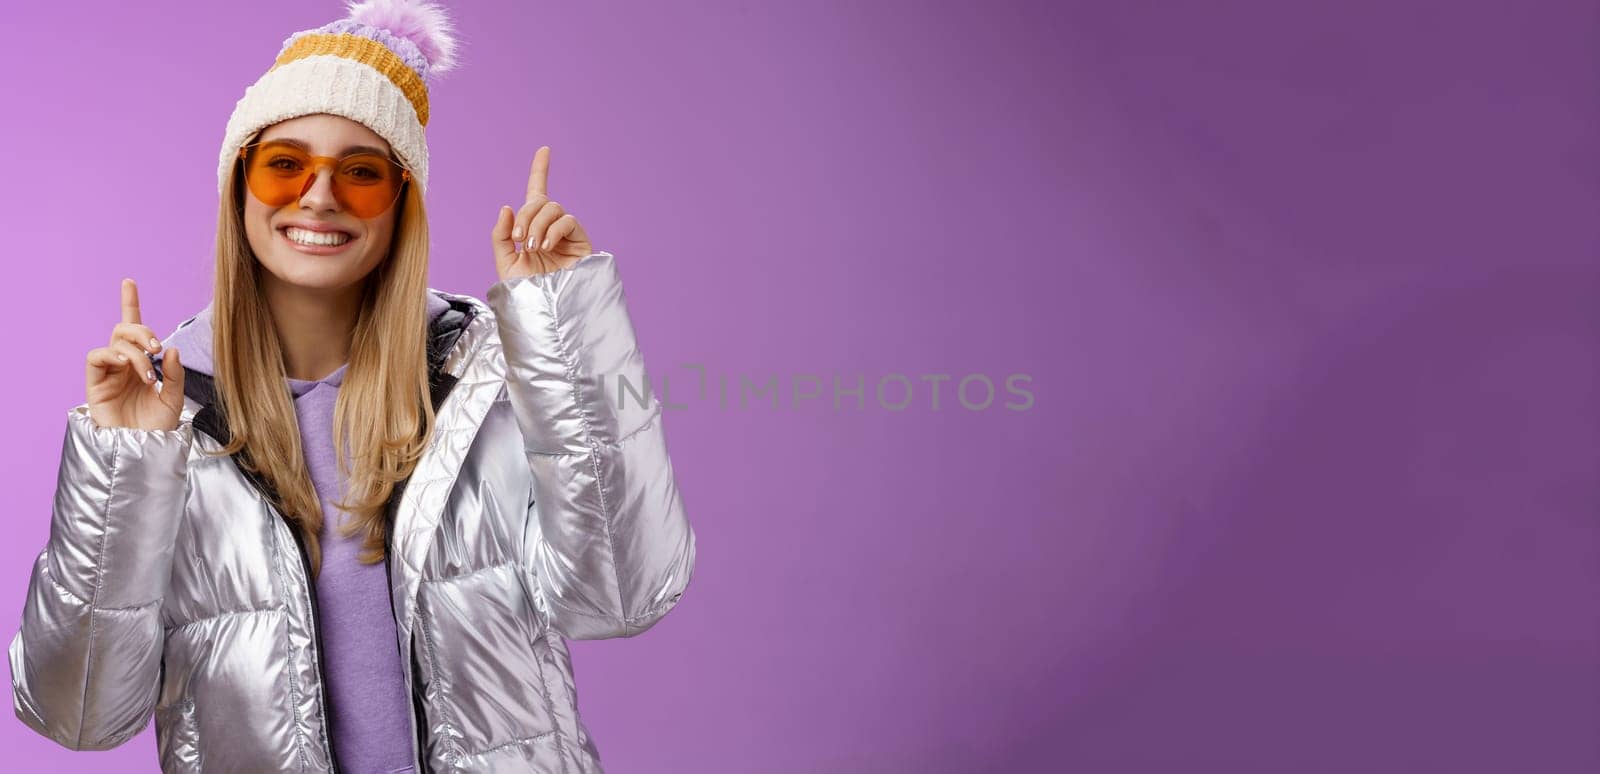 Lifestyle. Joyful energized entertained cute blond woman having fun enjoy vacation snowy mountain trip wearing sunglasses silver jacket winter hat dancing pointing up amused standing purple background.